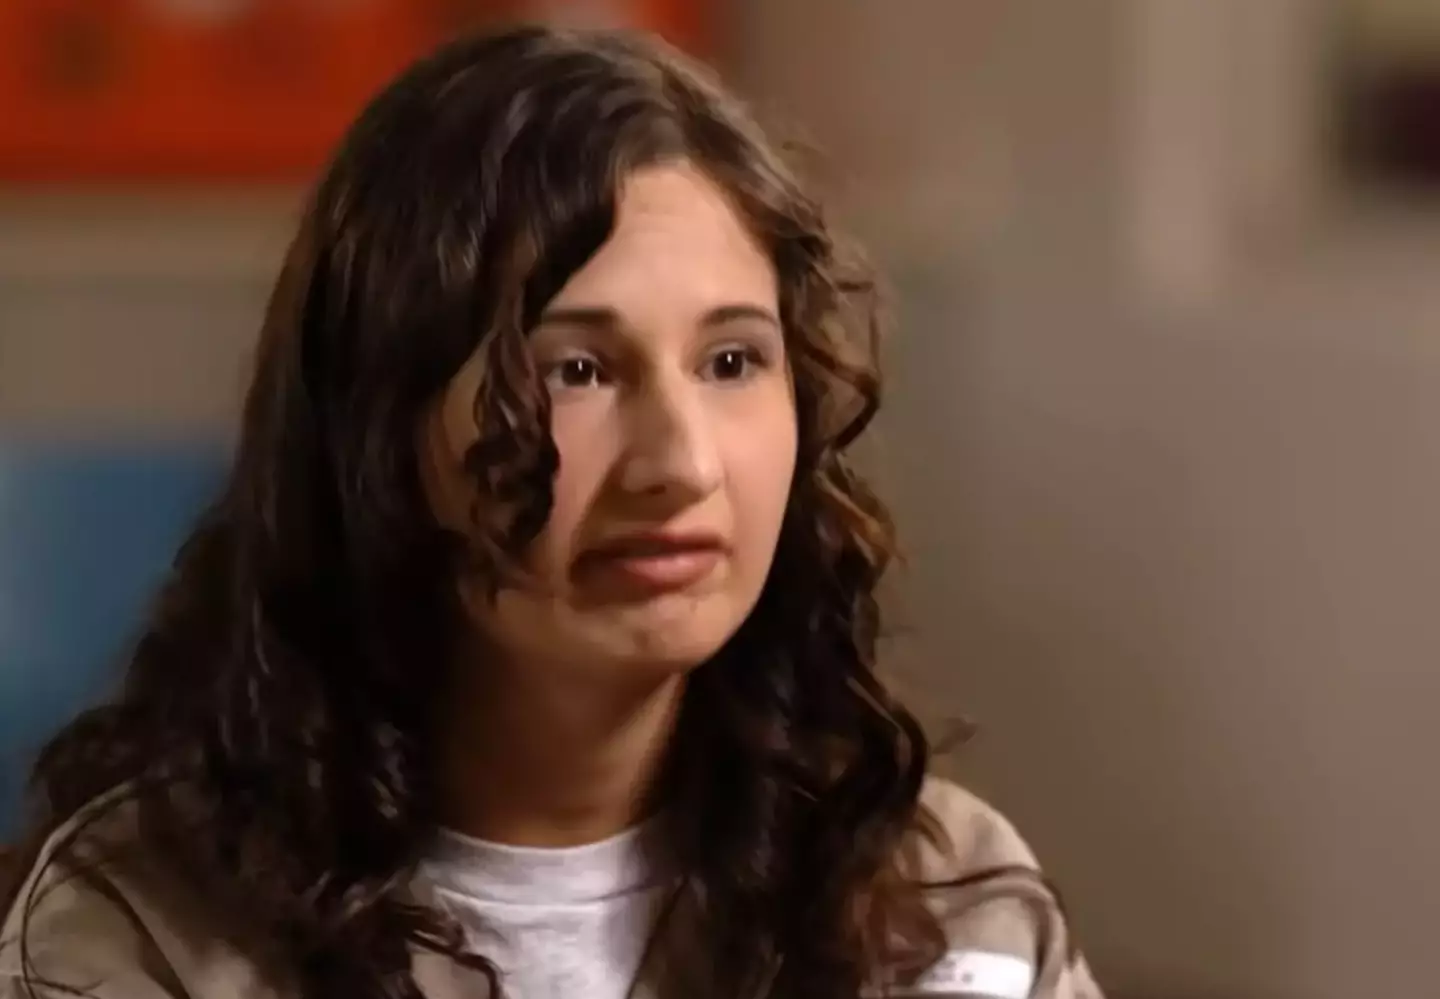 Gypsy Rose Blanchard is set to be released from prison on Thursday.